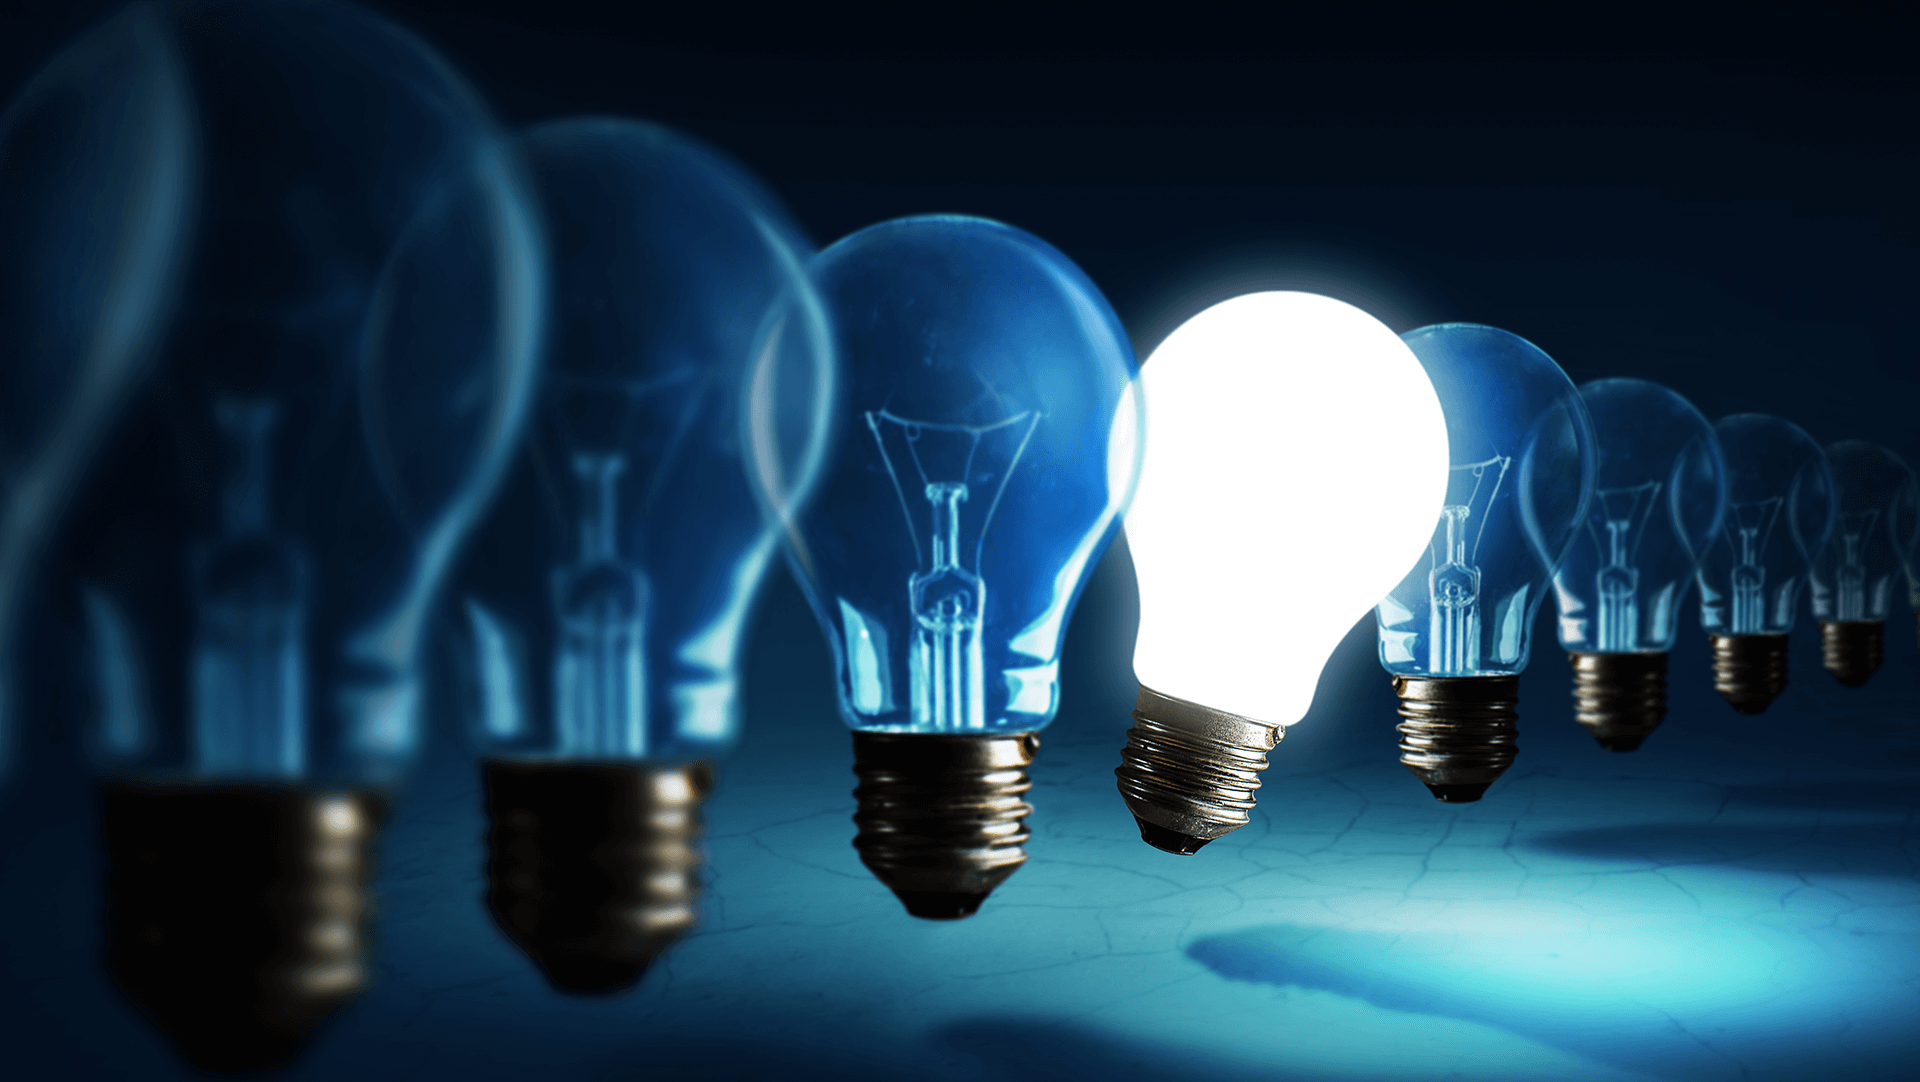 A glowing idea stands out among dim ones – an illuminated light bulb shines brightly in a lineup of unlit bulbs against a dark blue background, symbolizing inspiration and innovation.